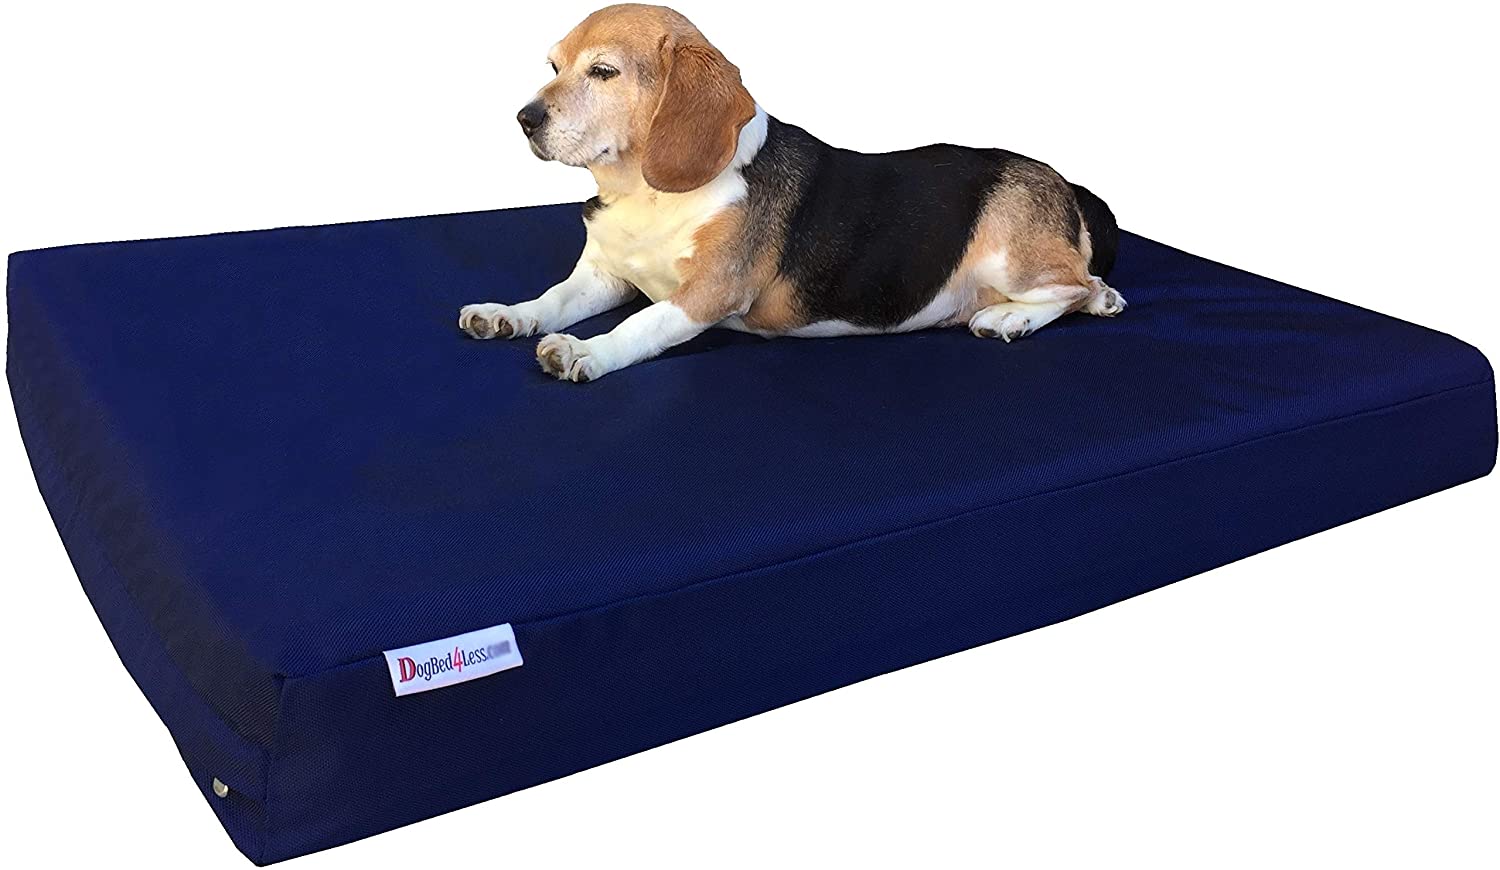 Dogbed4less Heavy Duty Memory Foam Dog Bed